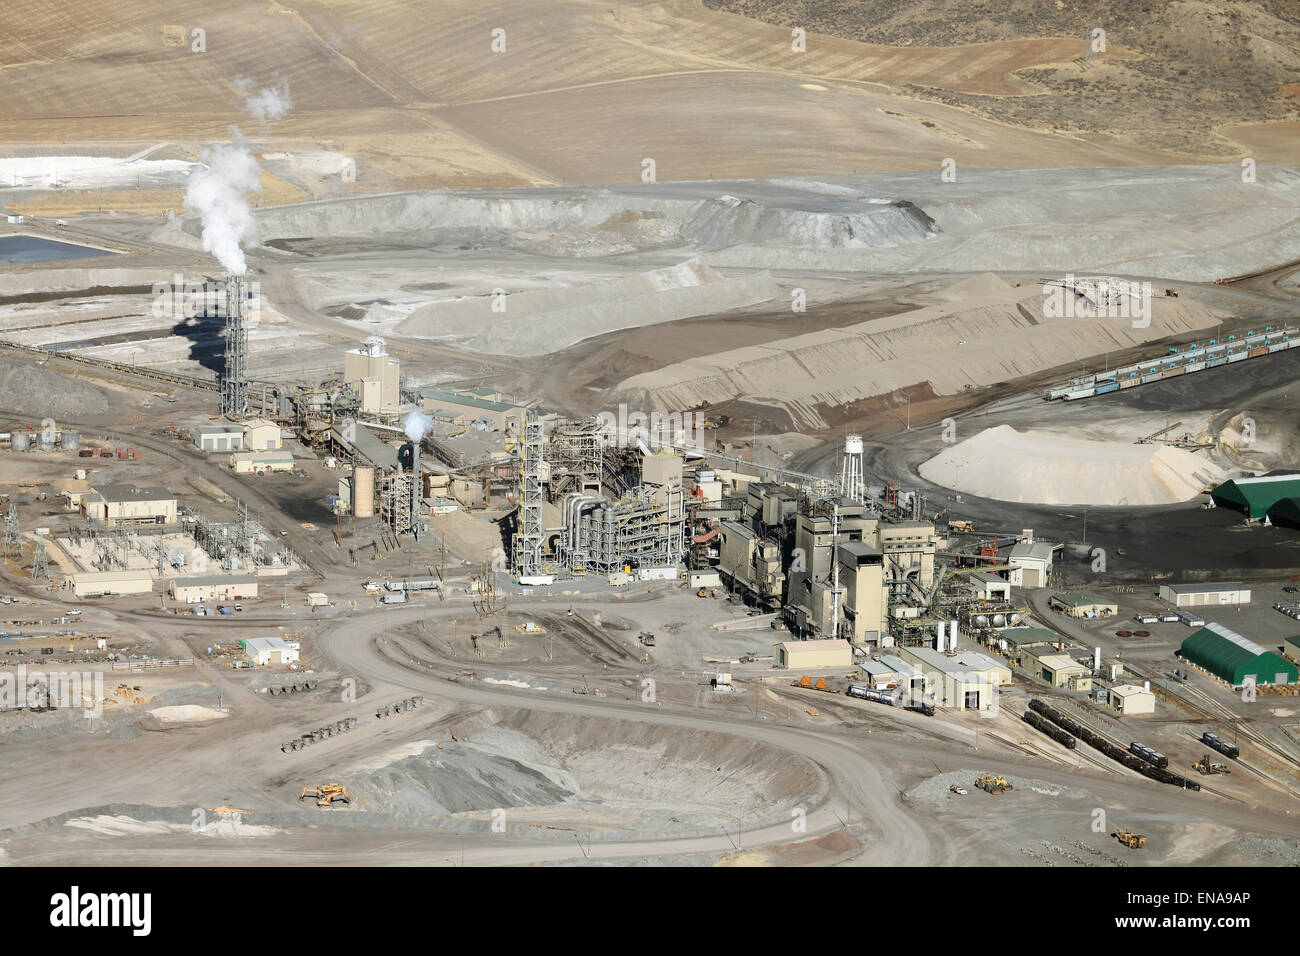 An aerial view of the processing facility at an open pit phosphate mine Stock Photo